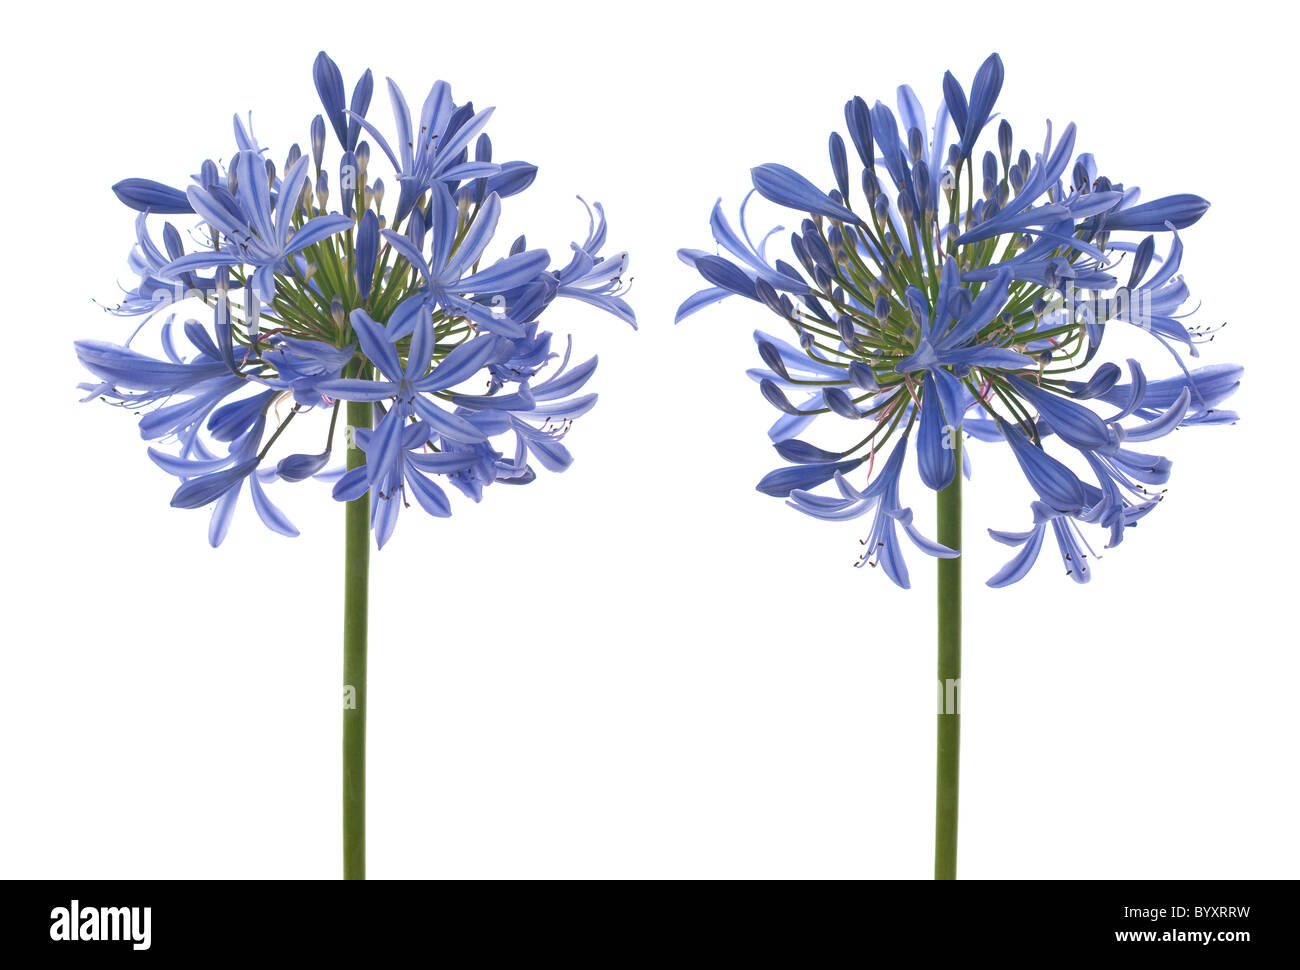 Agapanthus blooms with umbrella like flower clusters of funnel shaped flowers on tall leafless stalks. Space for copy. Stock Photo